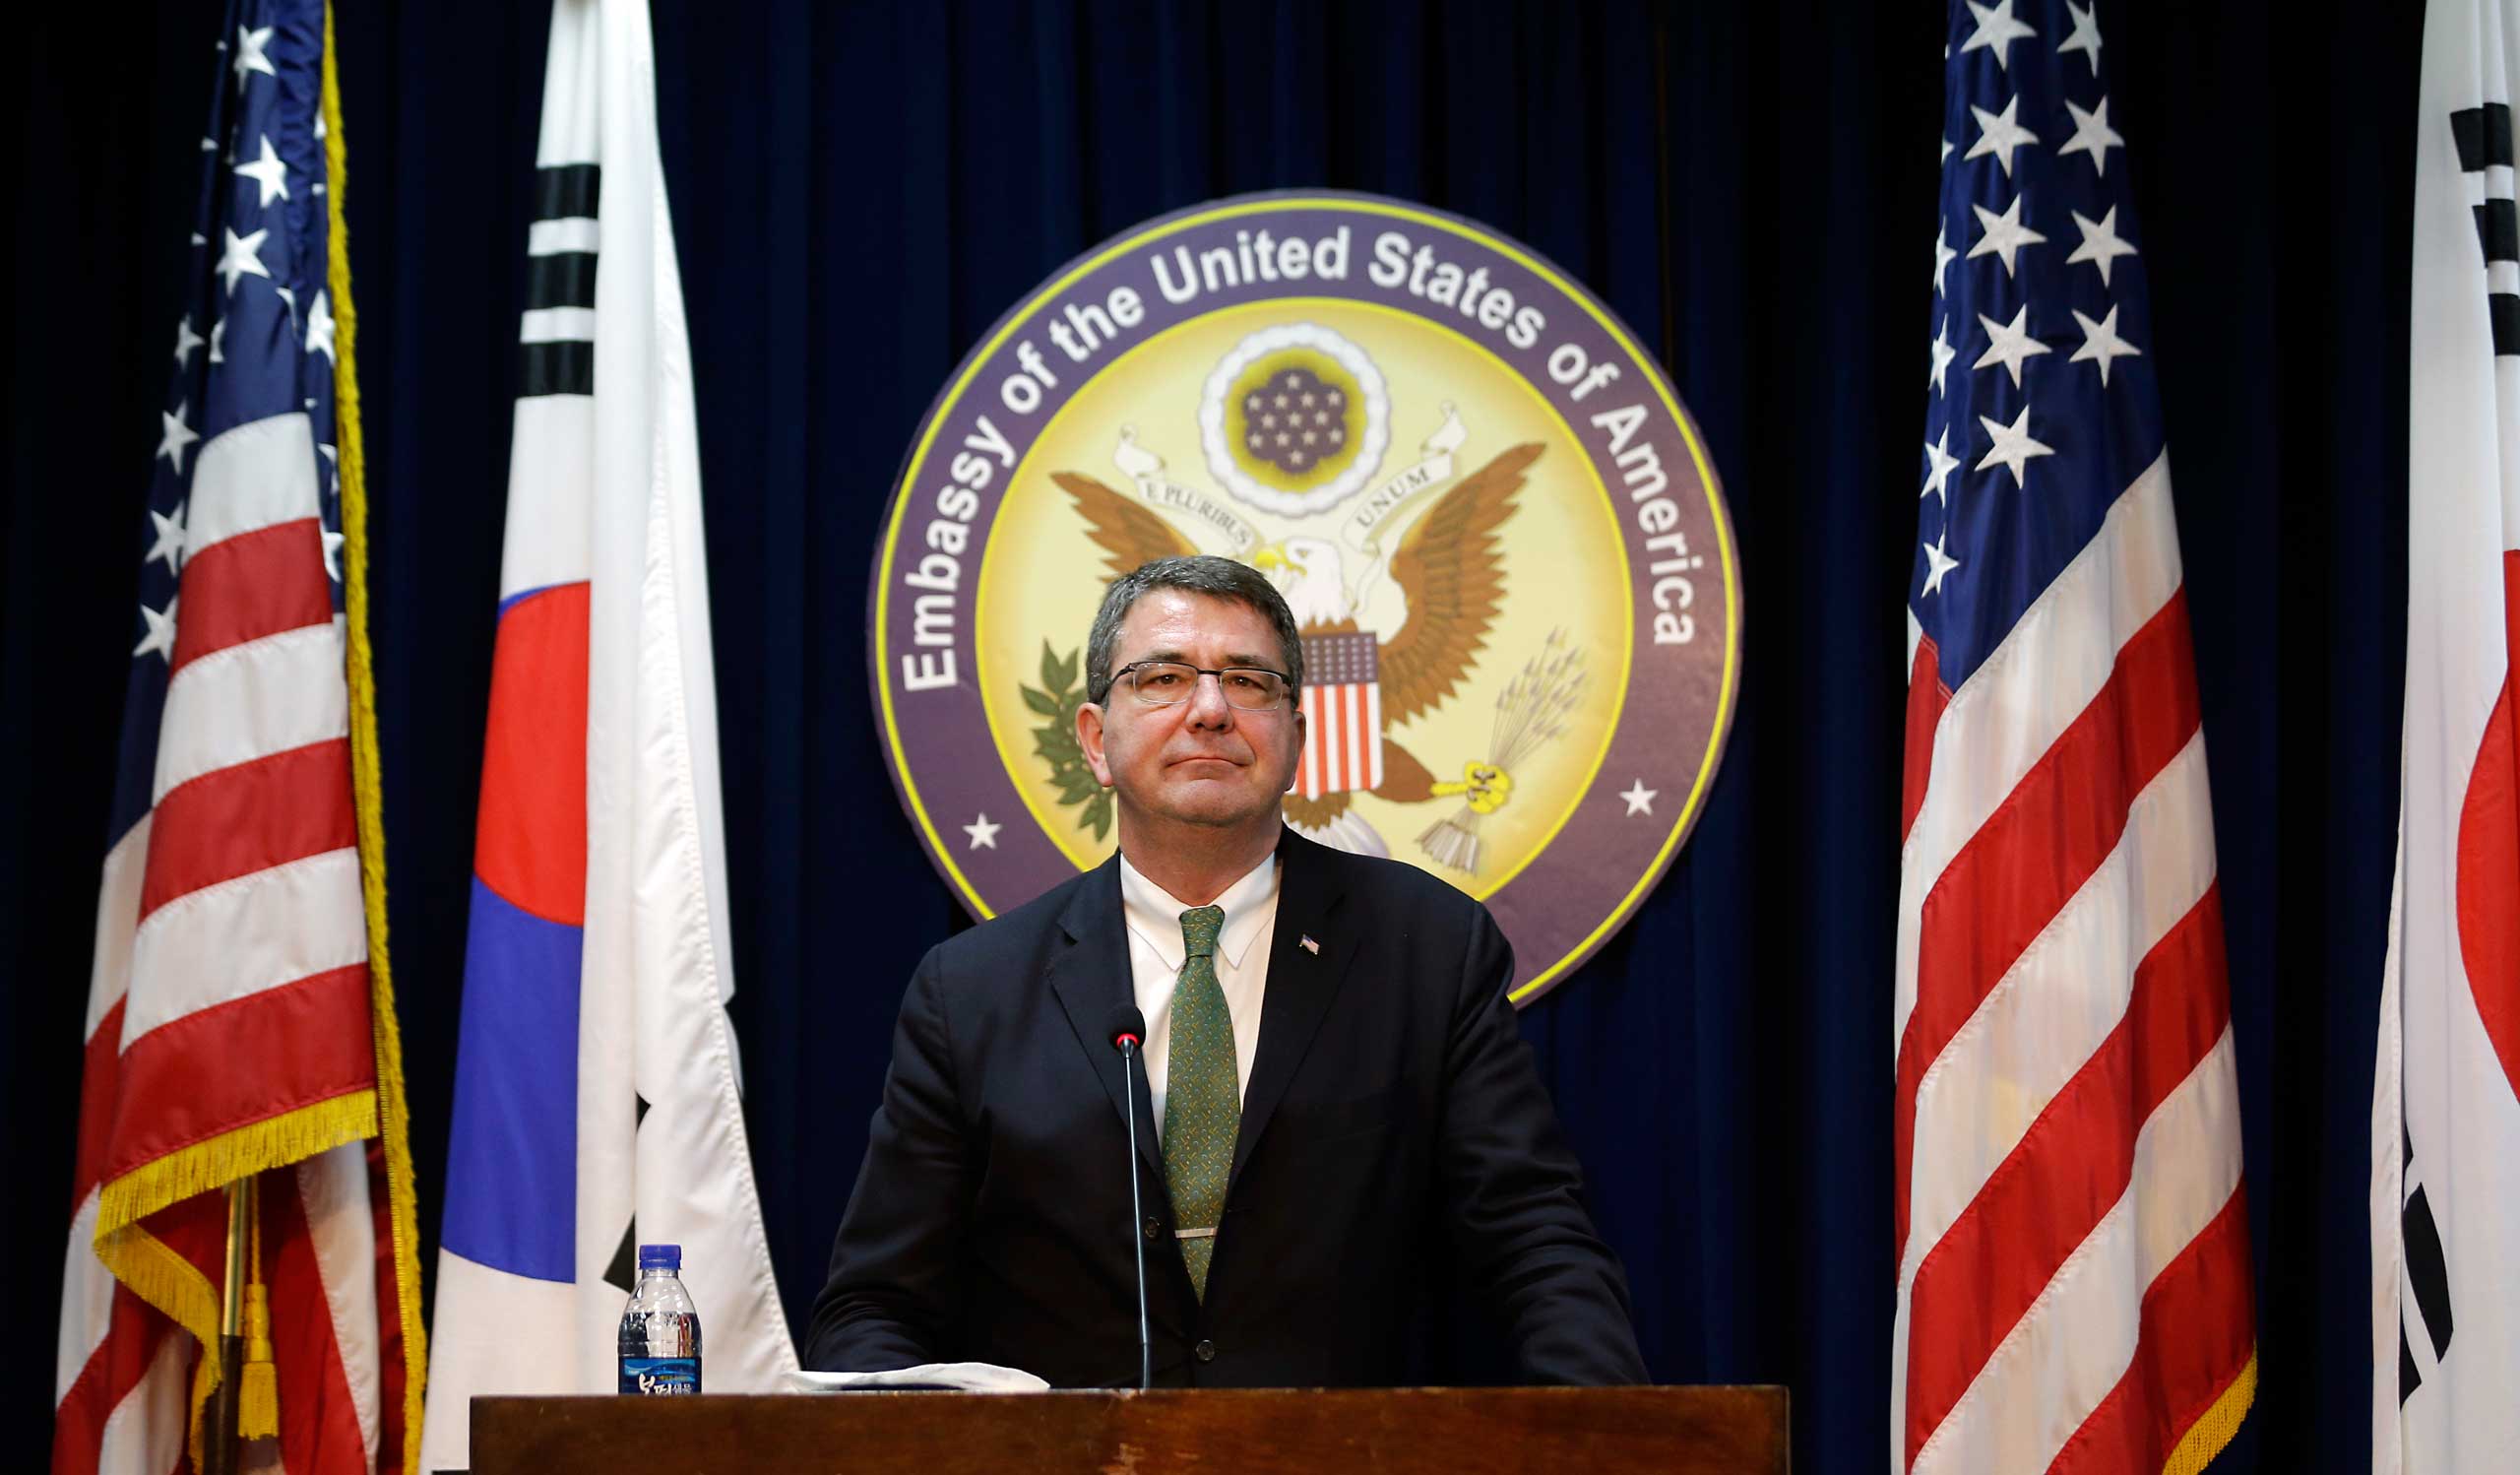 U.S. Deputy Secretary of Defense Ashton Carter listens to reporters' question during a news conference at the U.S. Embassy in Seoul on March 18, 2013. (Lee Jin-man—AP)